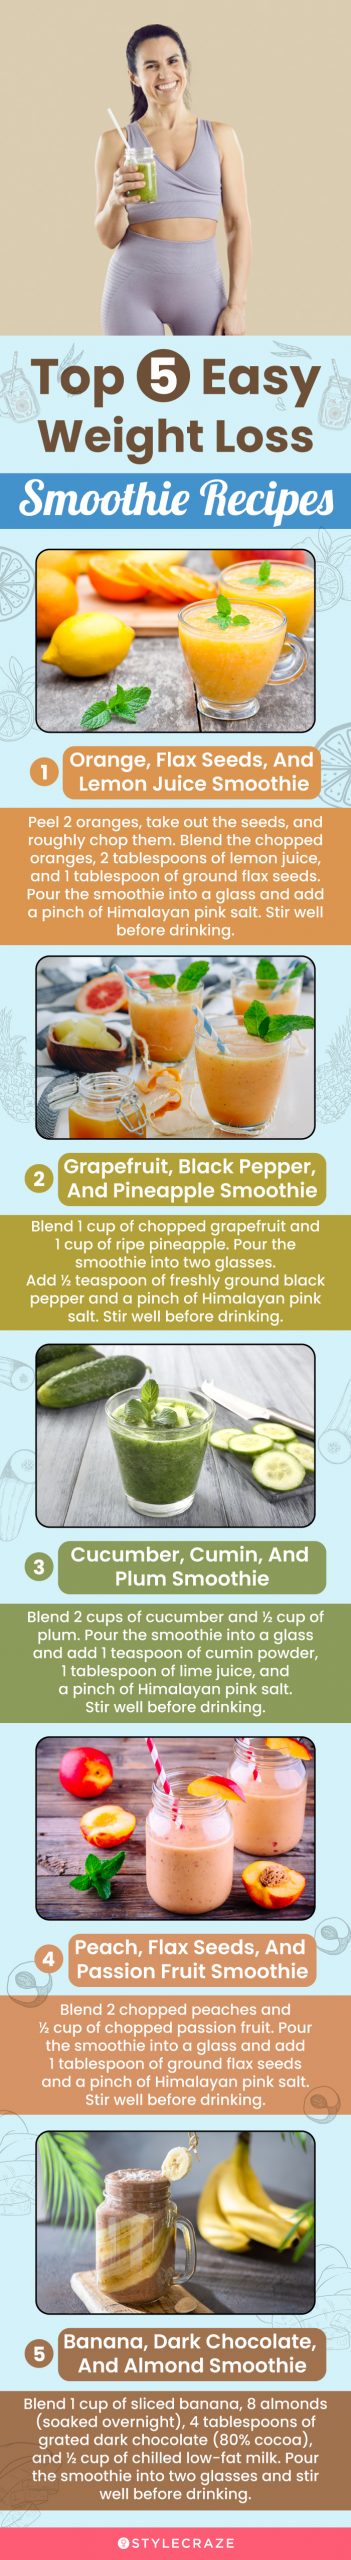 top 5 easy weight loss smoothie recipes (infographic)